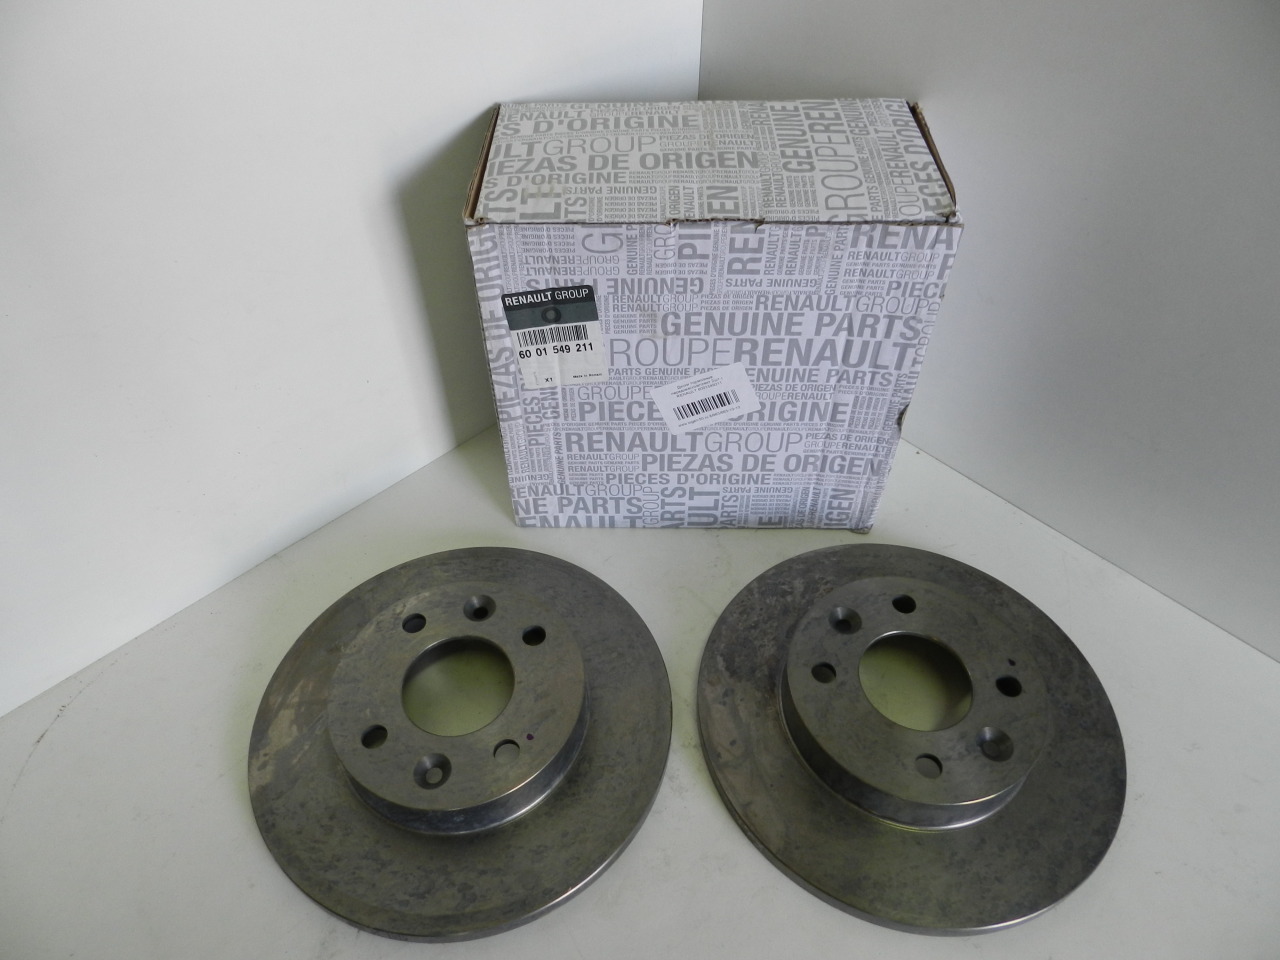 Renault 60 01 549 211 Unventilated front brake disc 6001549211